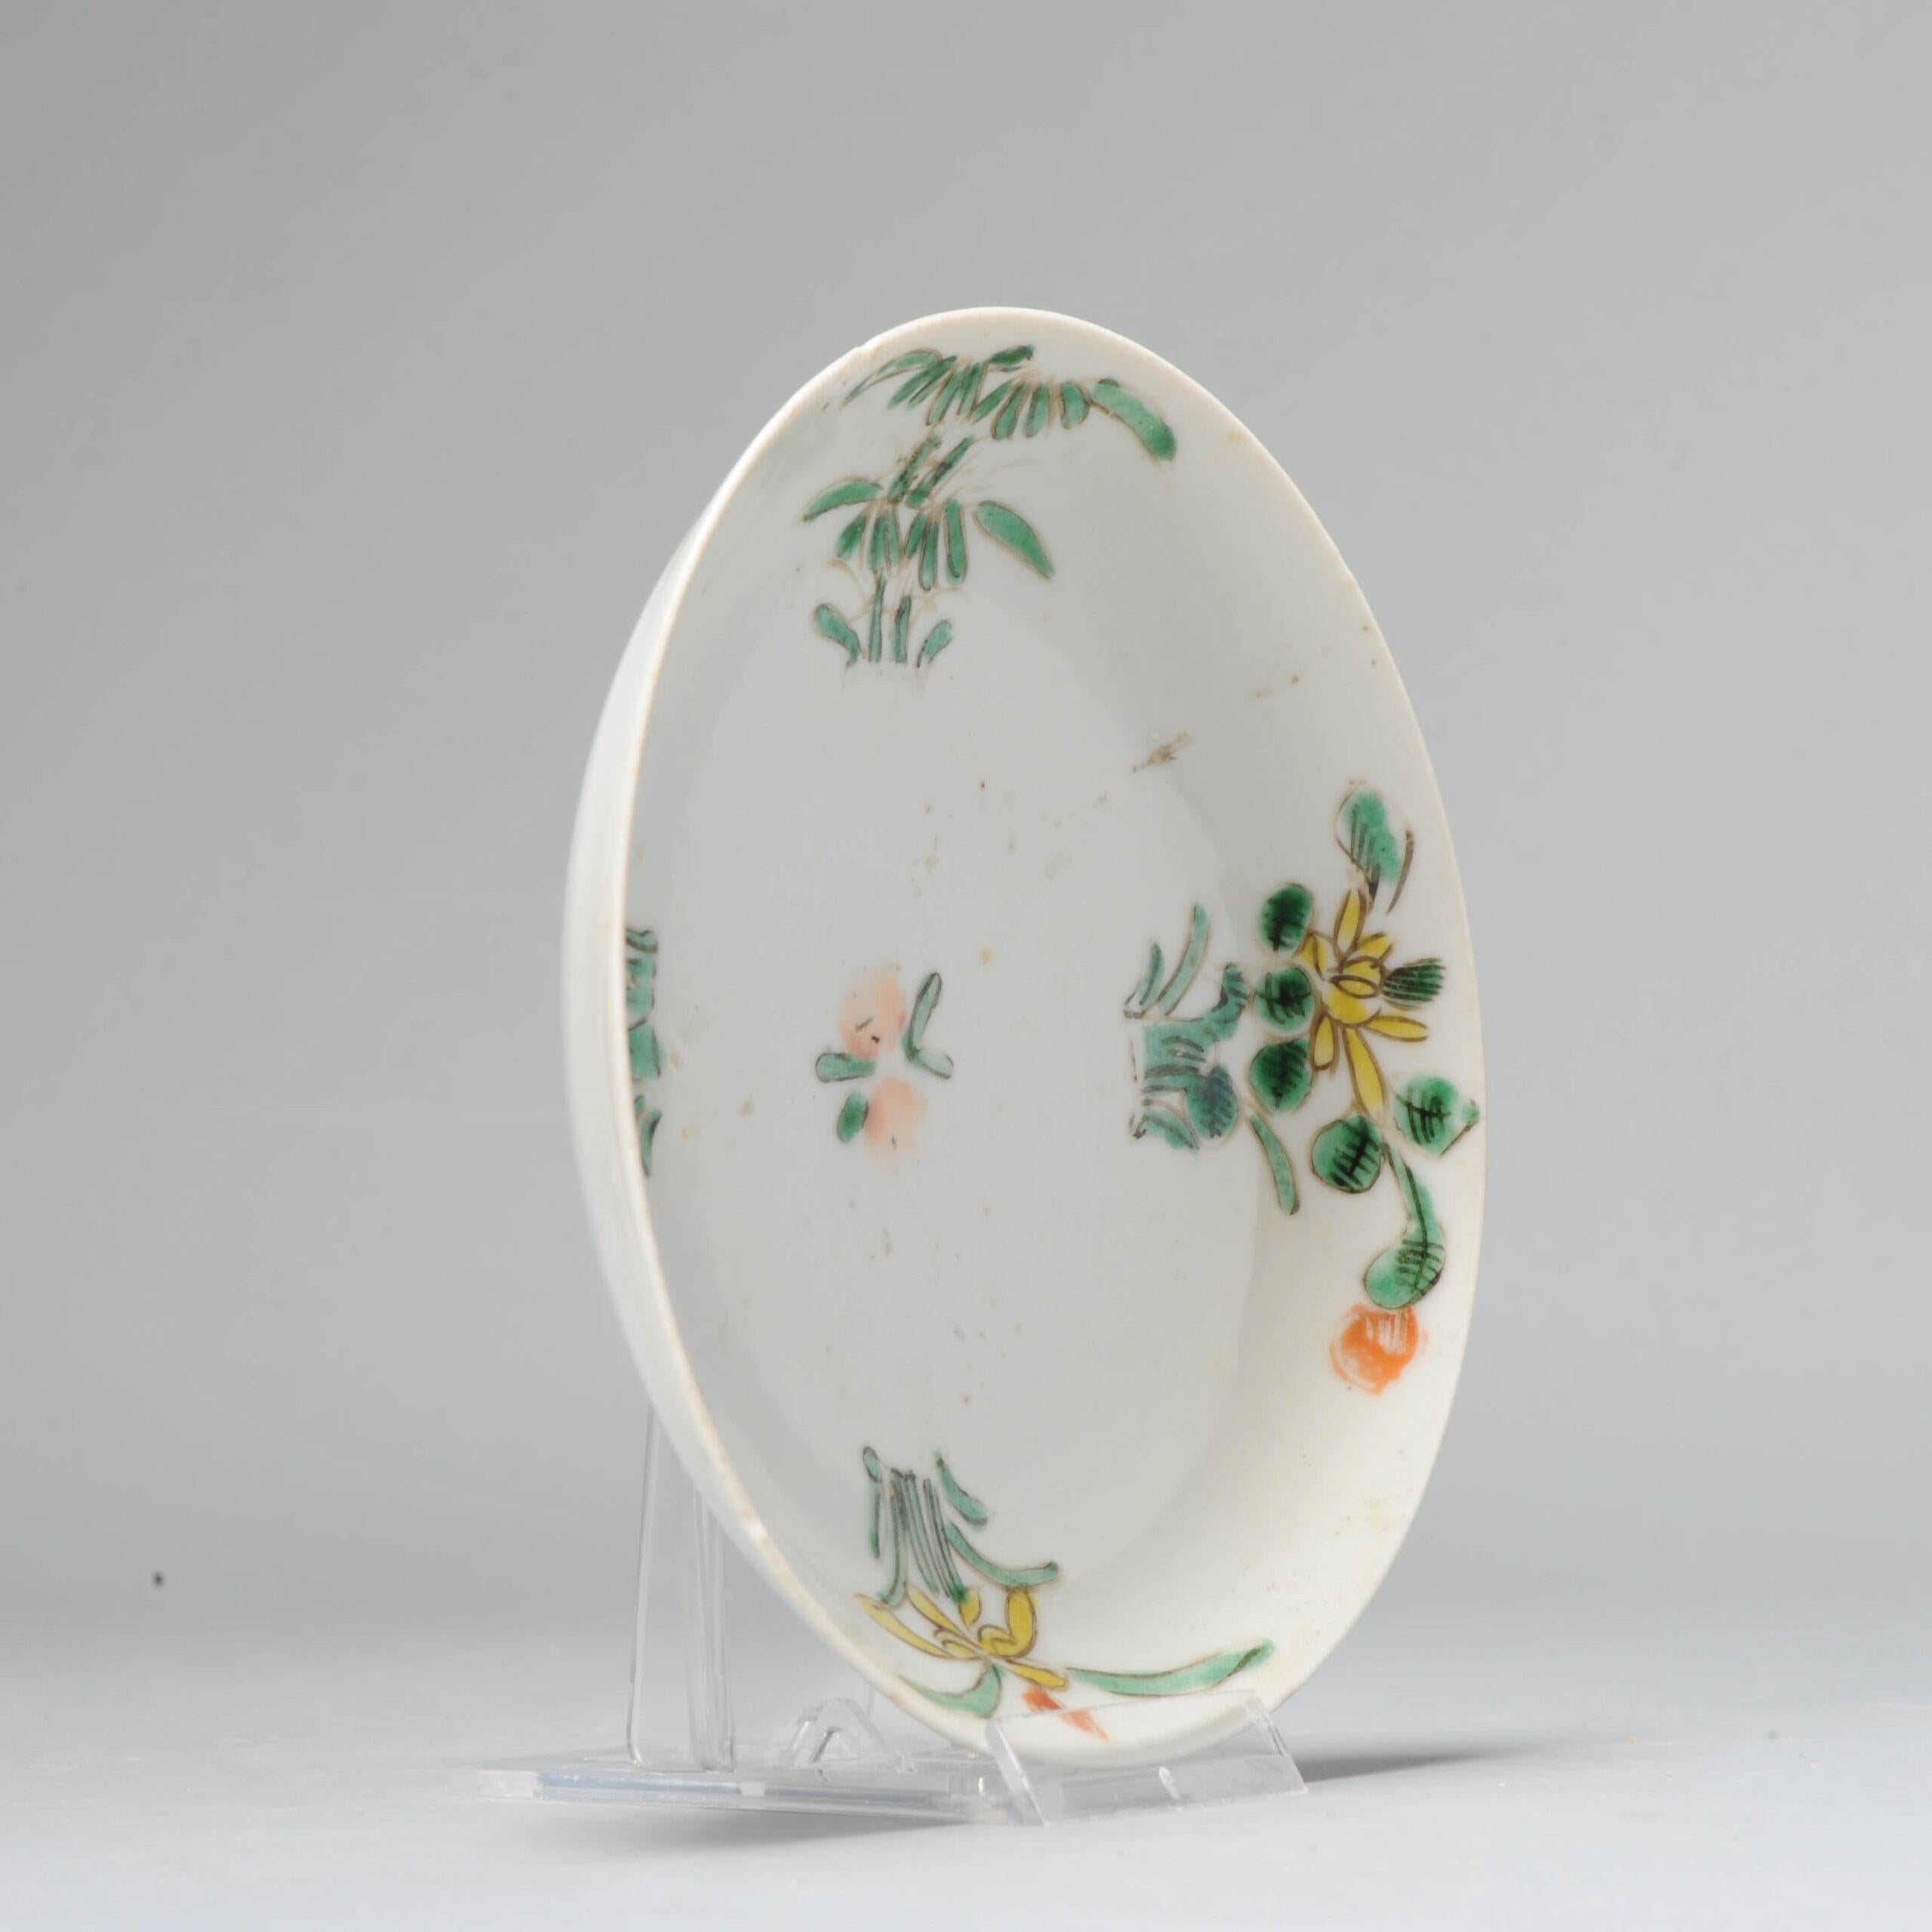 Presenting an exquisite early 17th century dish from Jingdezhen, crafted for the Japanese market. This stunning piece features the Ko Akae decoration of enamel overglaze flowers.

Additional information:
Material: Porcelain & Pottery
Region of